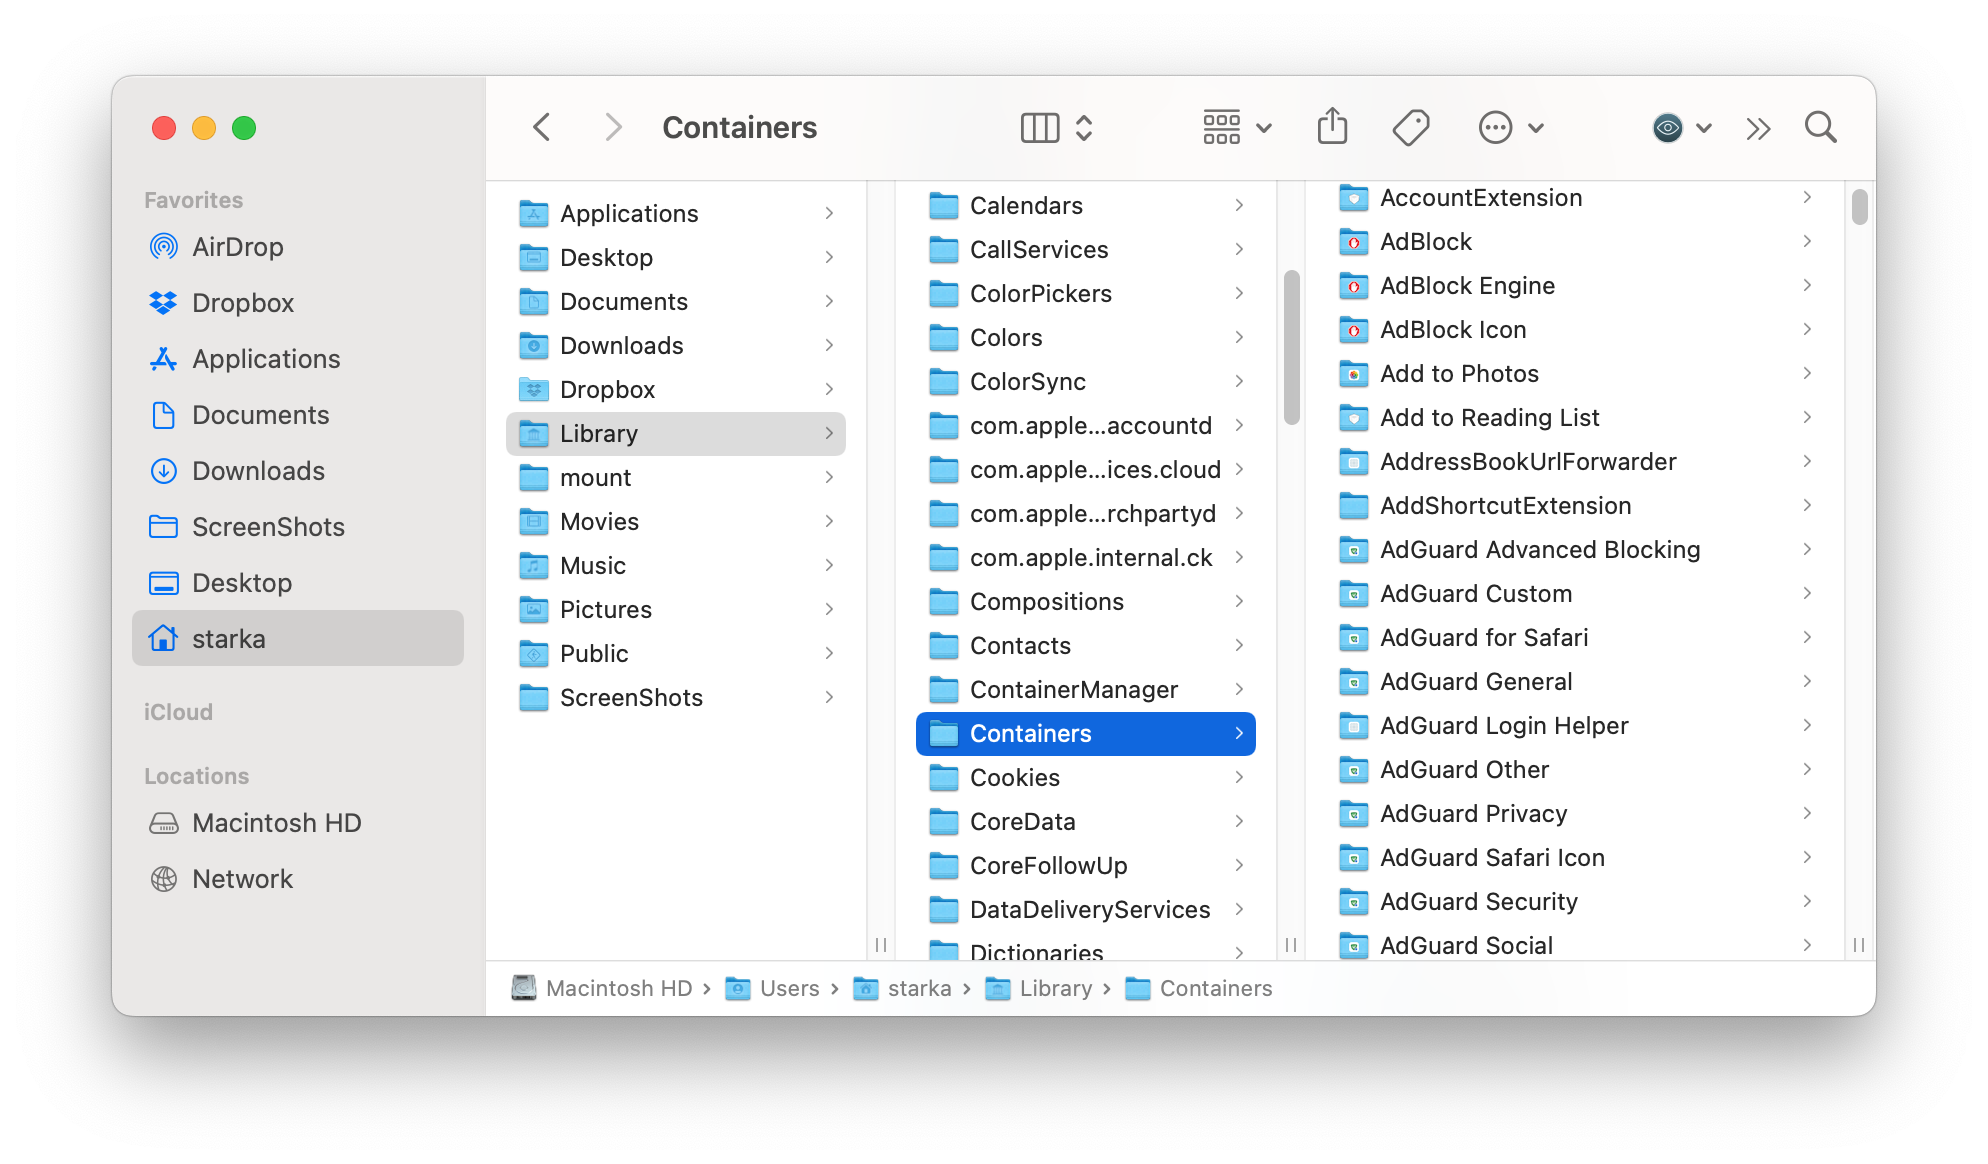 Containers folder in Finder window